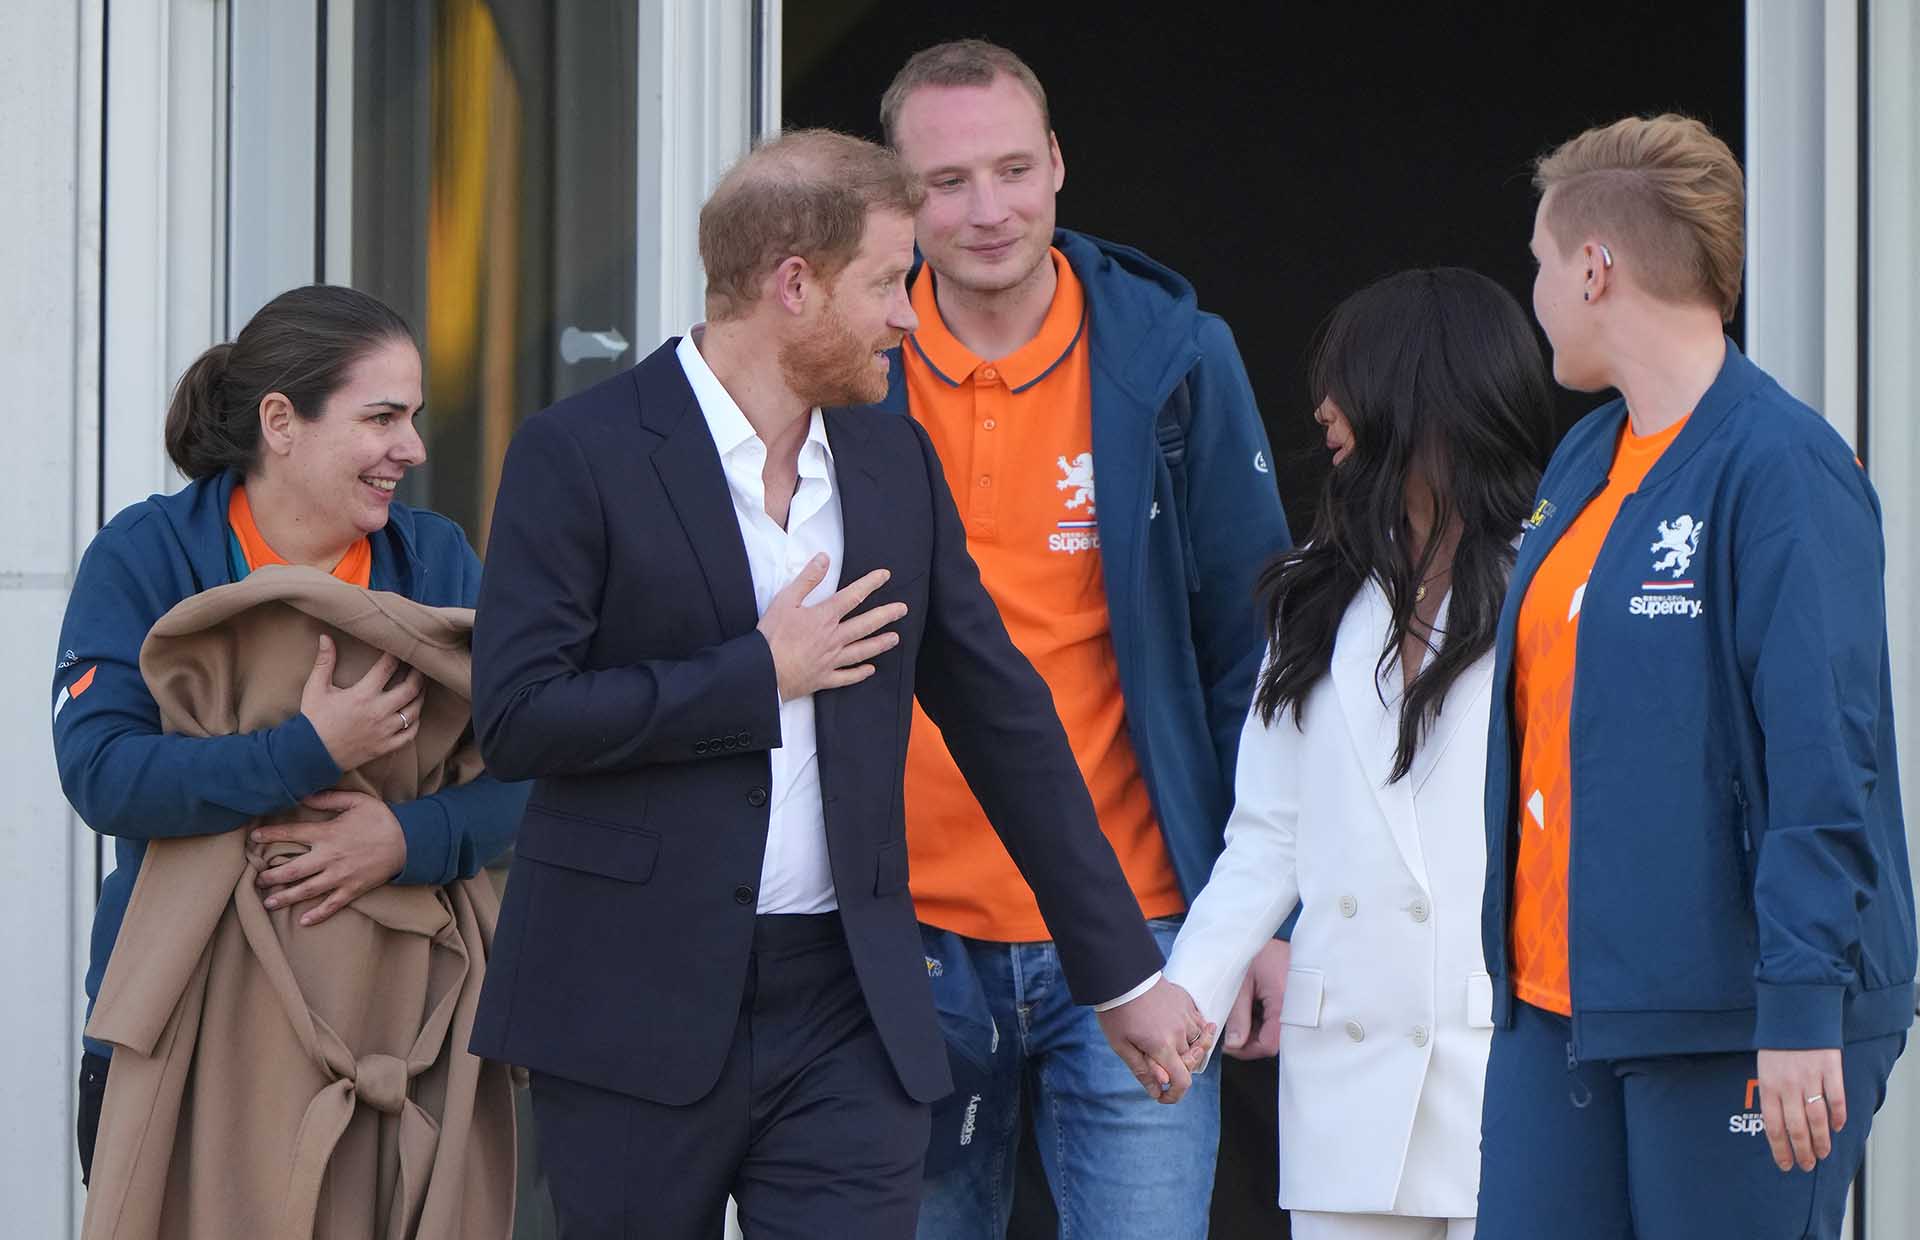 The Duke and Duchess of Sussex attend an Invictus Games  Reception